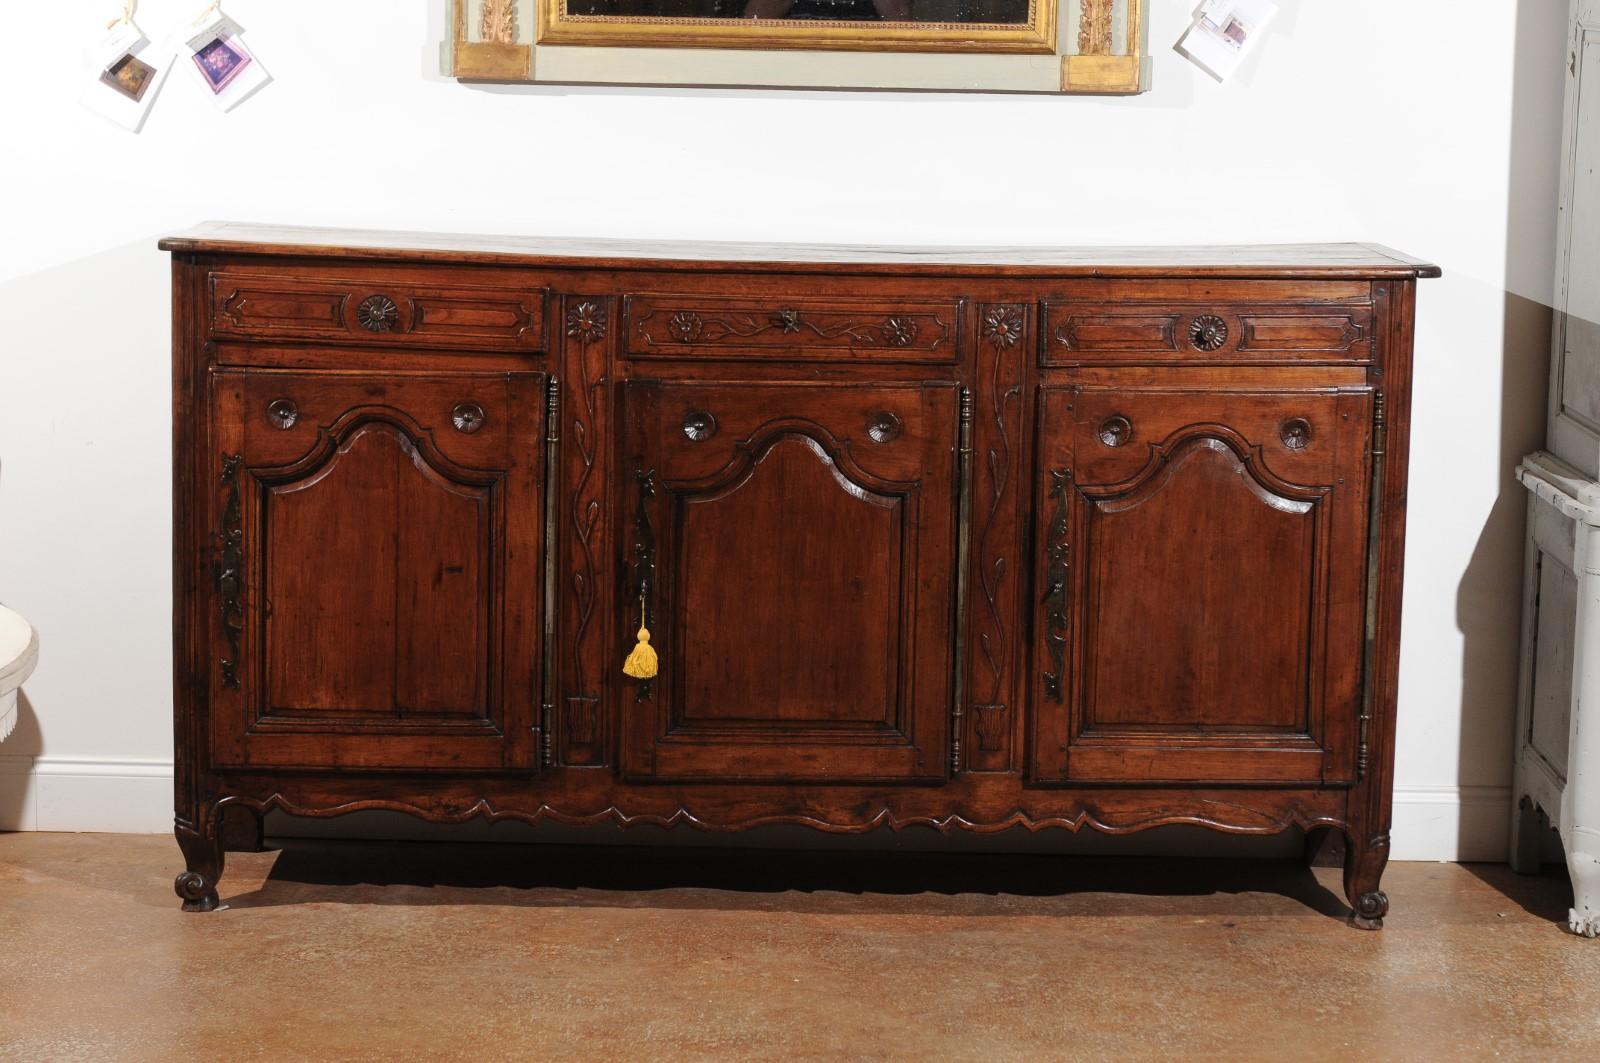 ON HOLD A northern French mid-18th century cherry wood enfilade from Picardy with three drawers over three doors and floral décor. Born during the reign of king Louis XV, this French cherry enfilade features a rectangular planked top with rounded